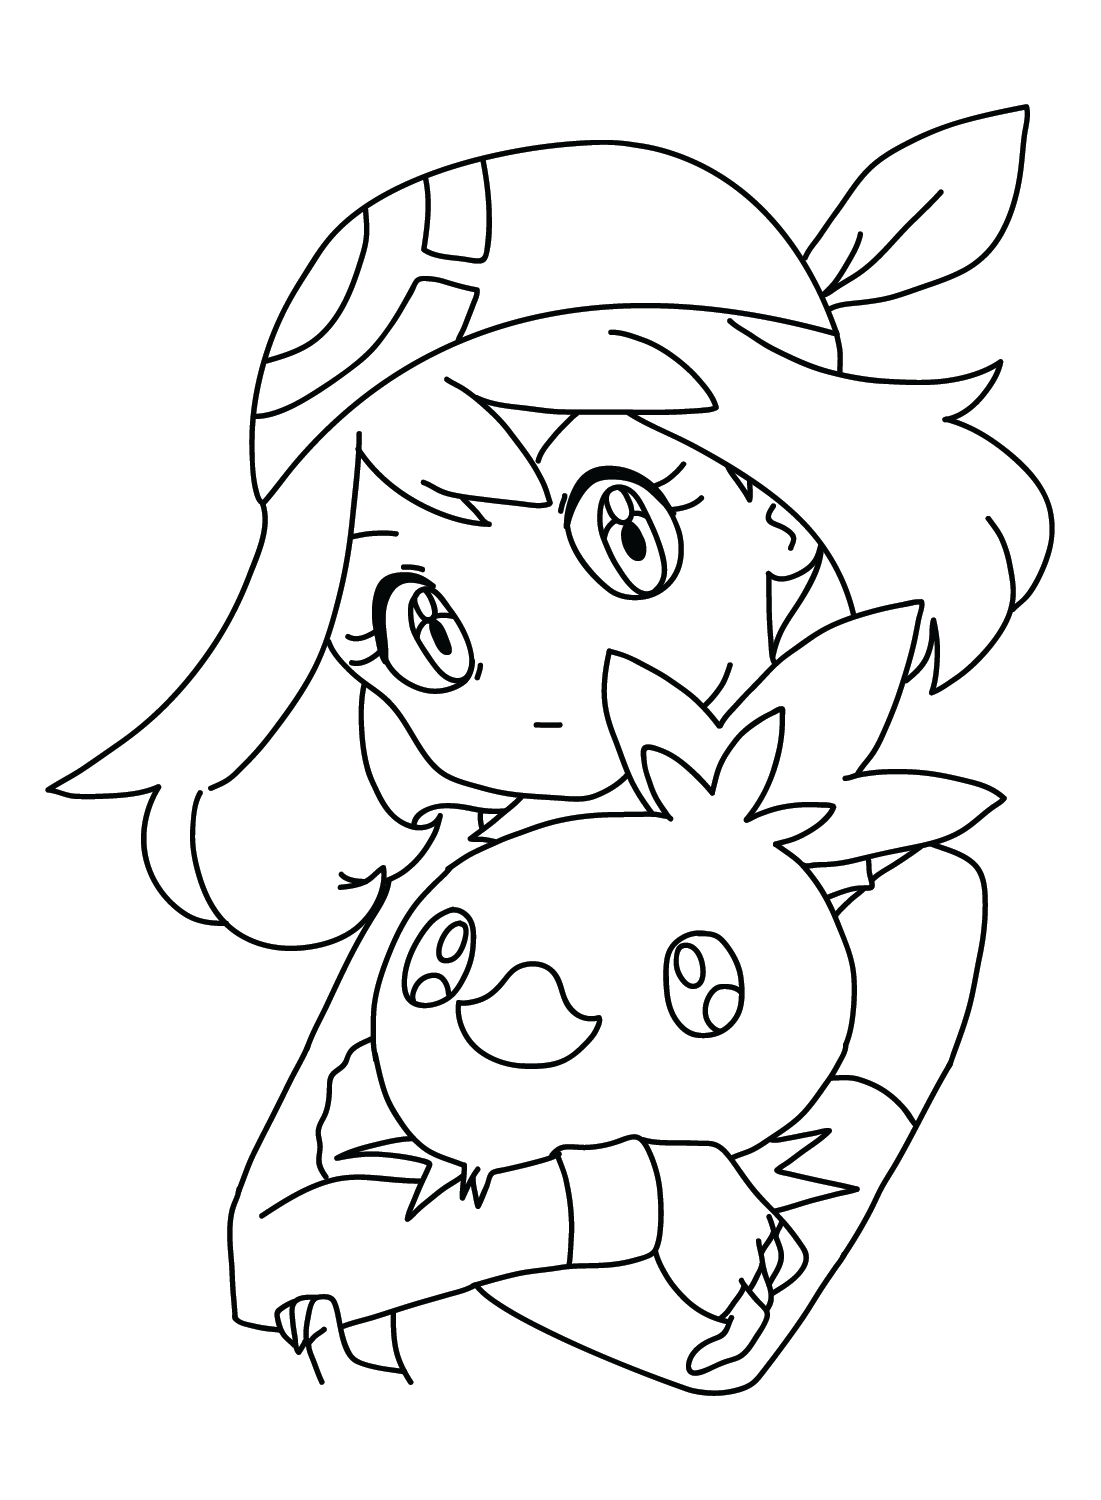 May Pokemon Picture to Color from May Pokemon